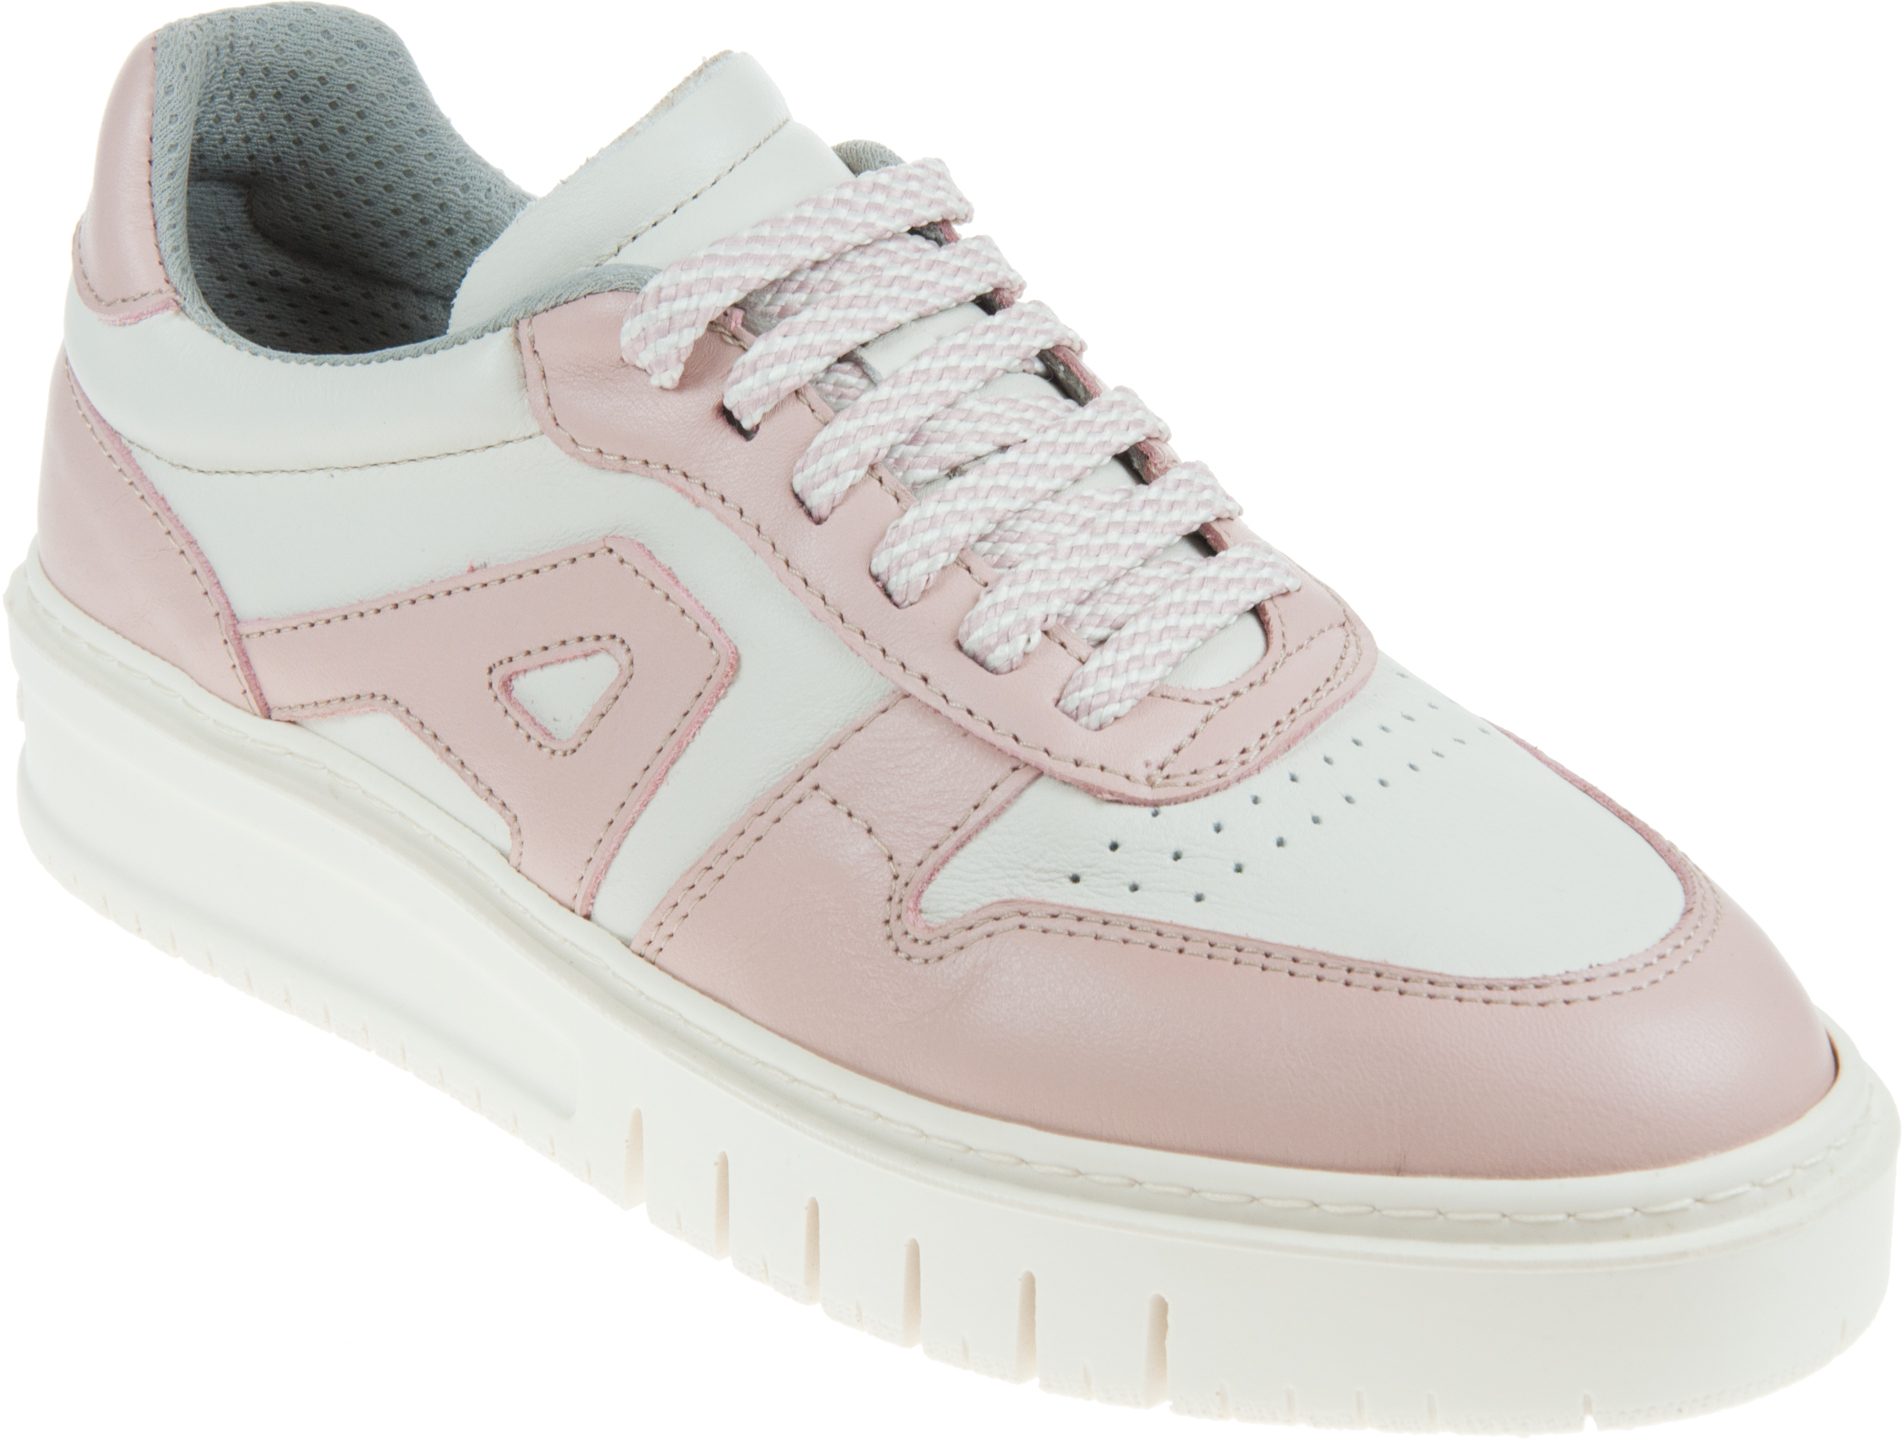 Art Company Belleville Lace Rose/Cream 1777 - Womens Trainers ...